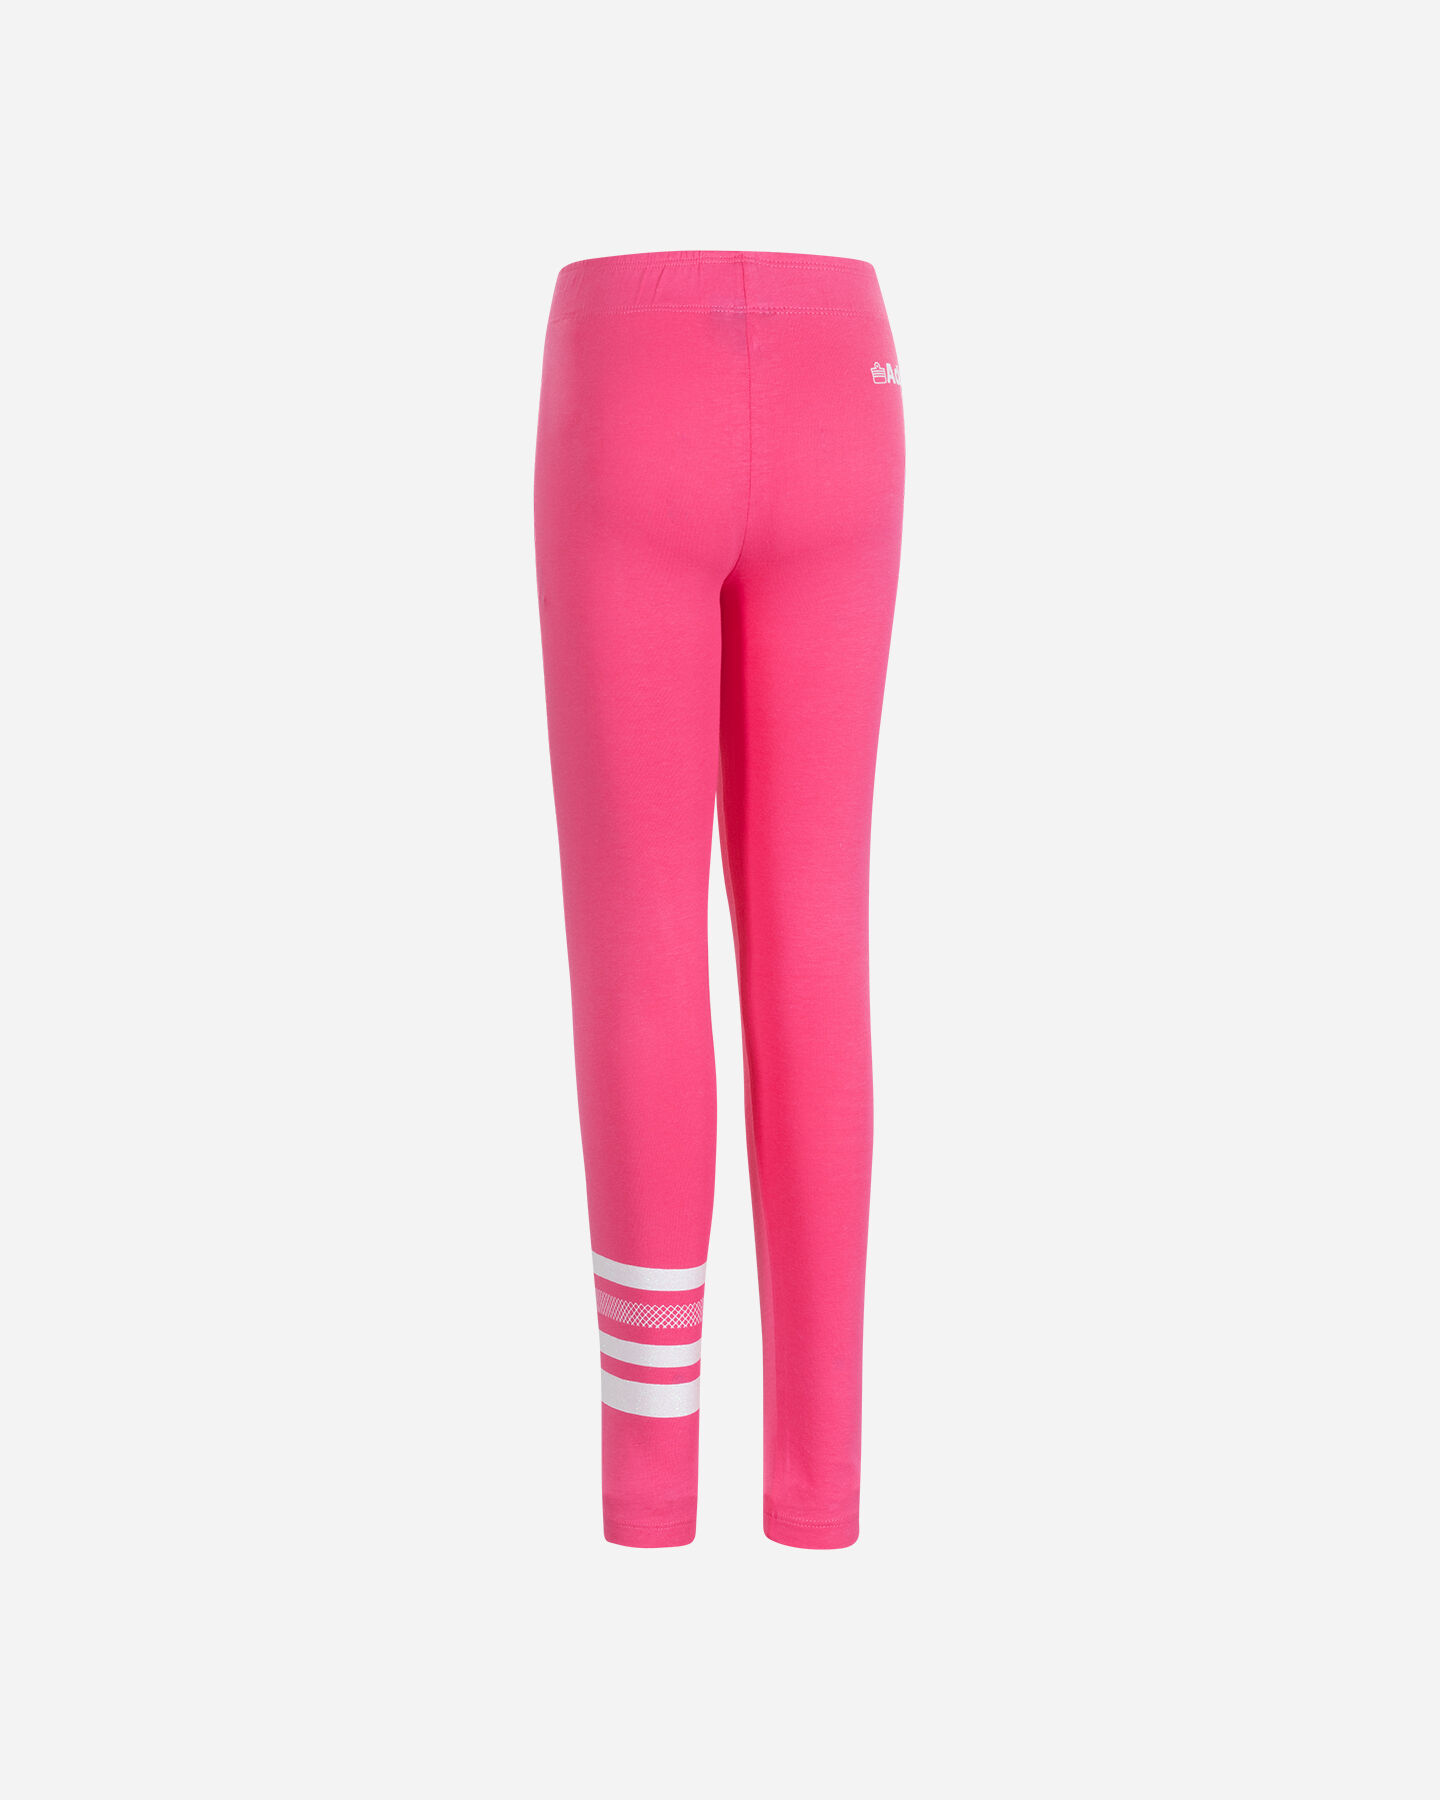  Leggings ADMIRAL BASIC SPORT JR S4119939|400|4A scatto 1